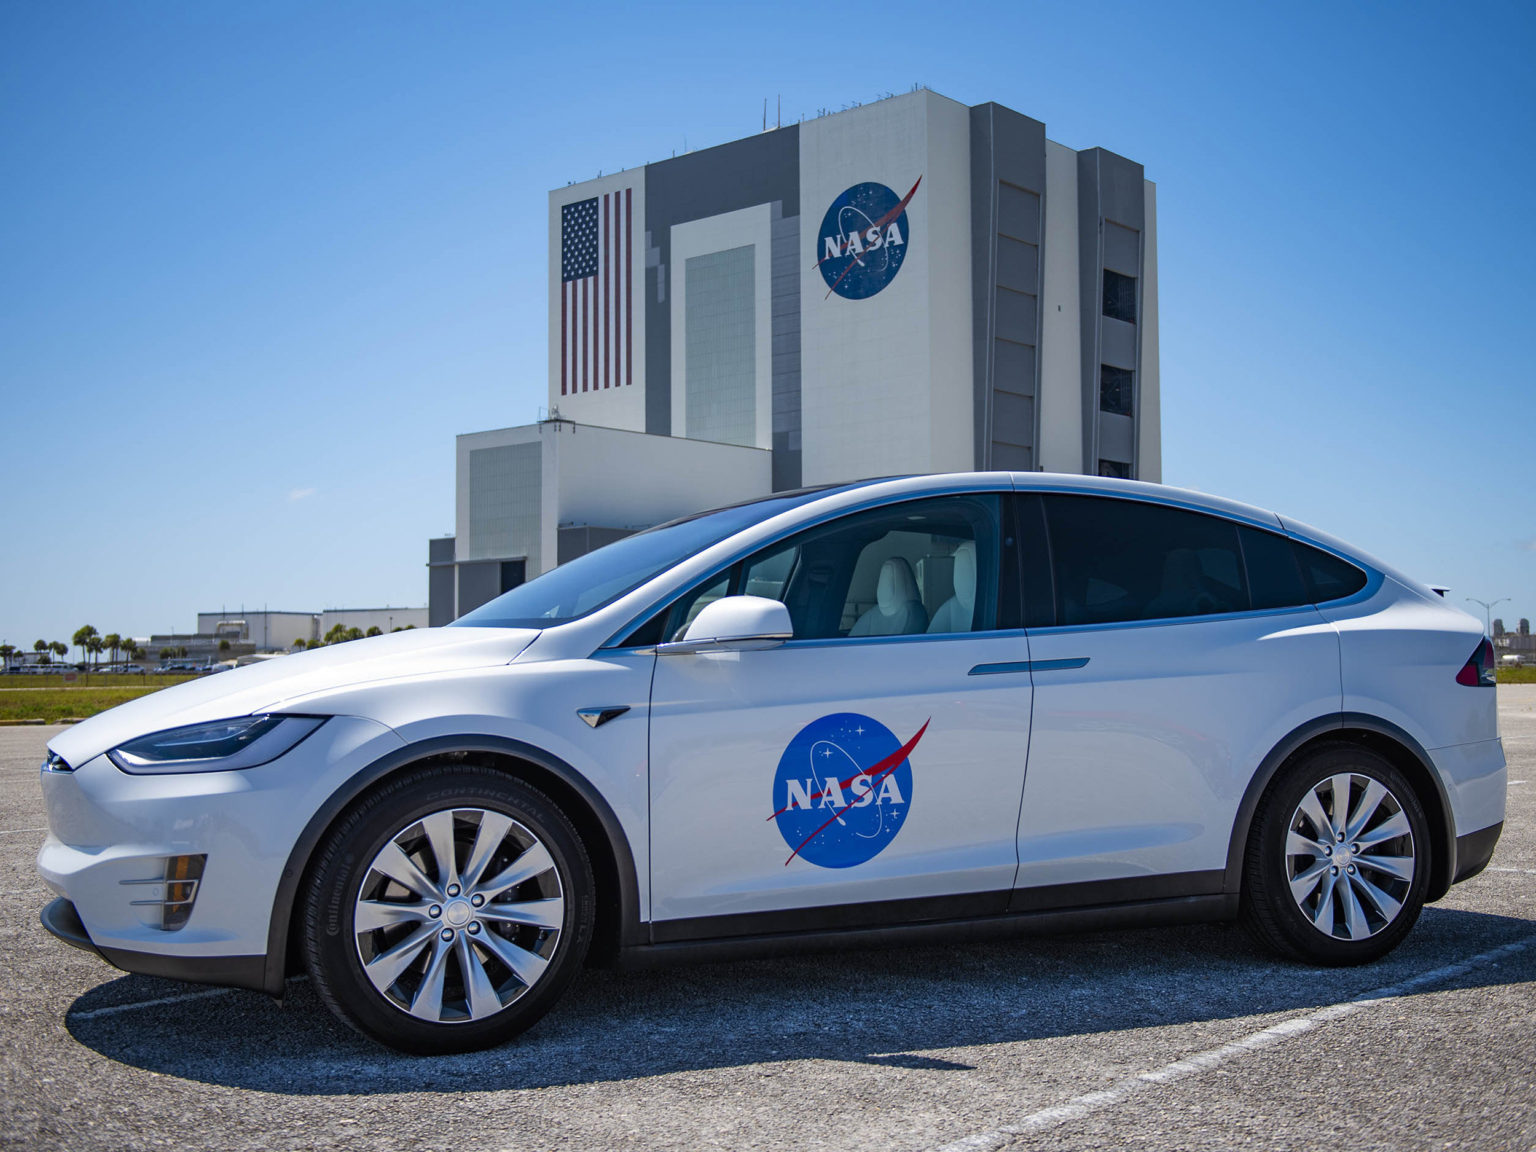 NASA Administrator Jim Bridenstine tweeted this photo on May 13 featuring the Model X at Kennedy Space Center.